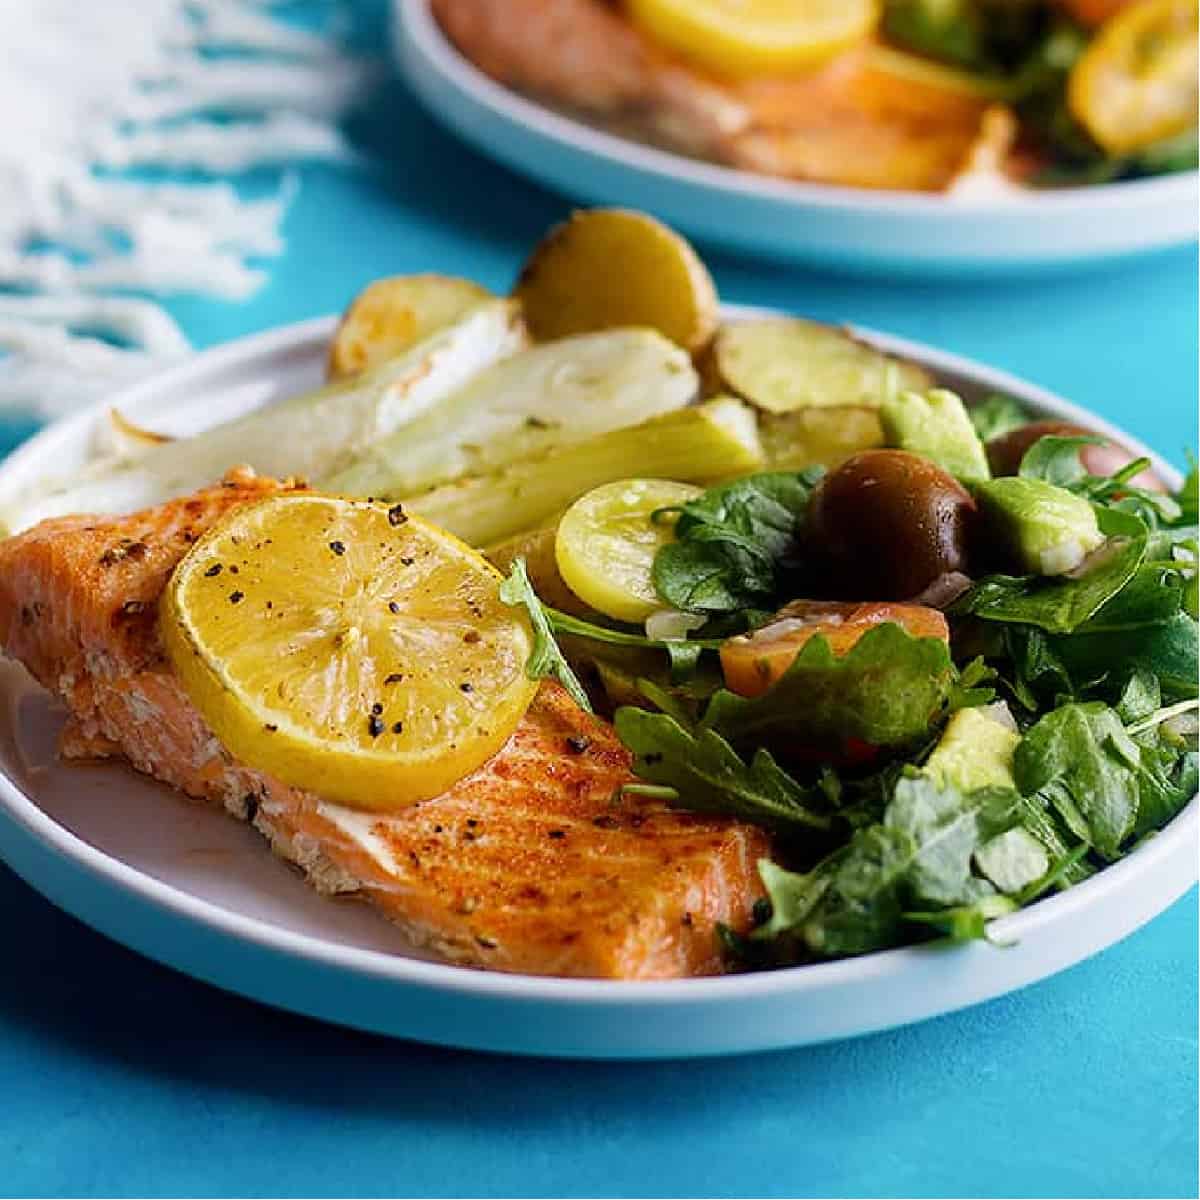 seafood recipes - Here is an easy baked salmon fillet recipe. Tender and flavorful salmon fillet are baked on a sheet pan and served with a delicious arugula avocado salad.
